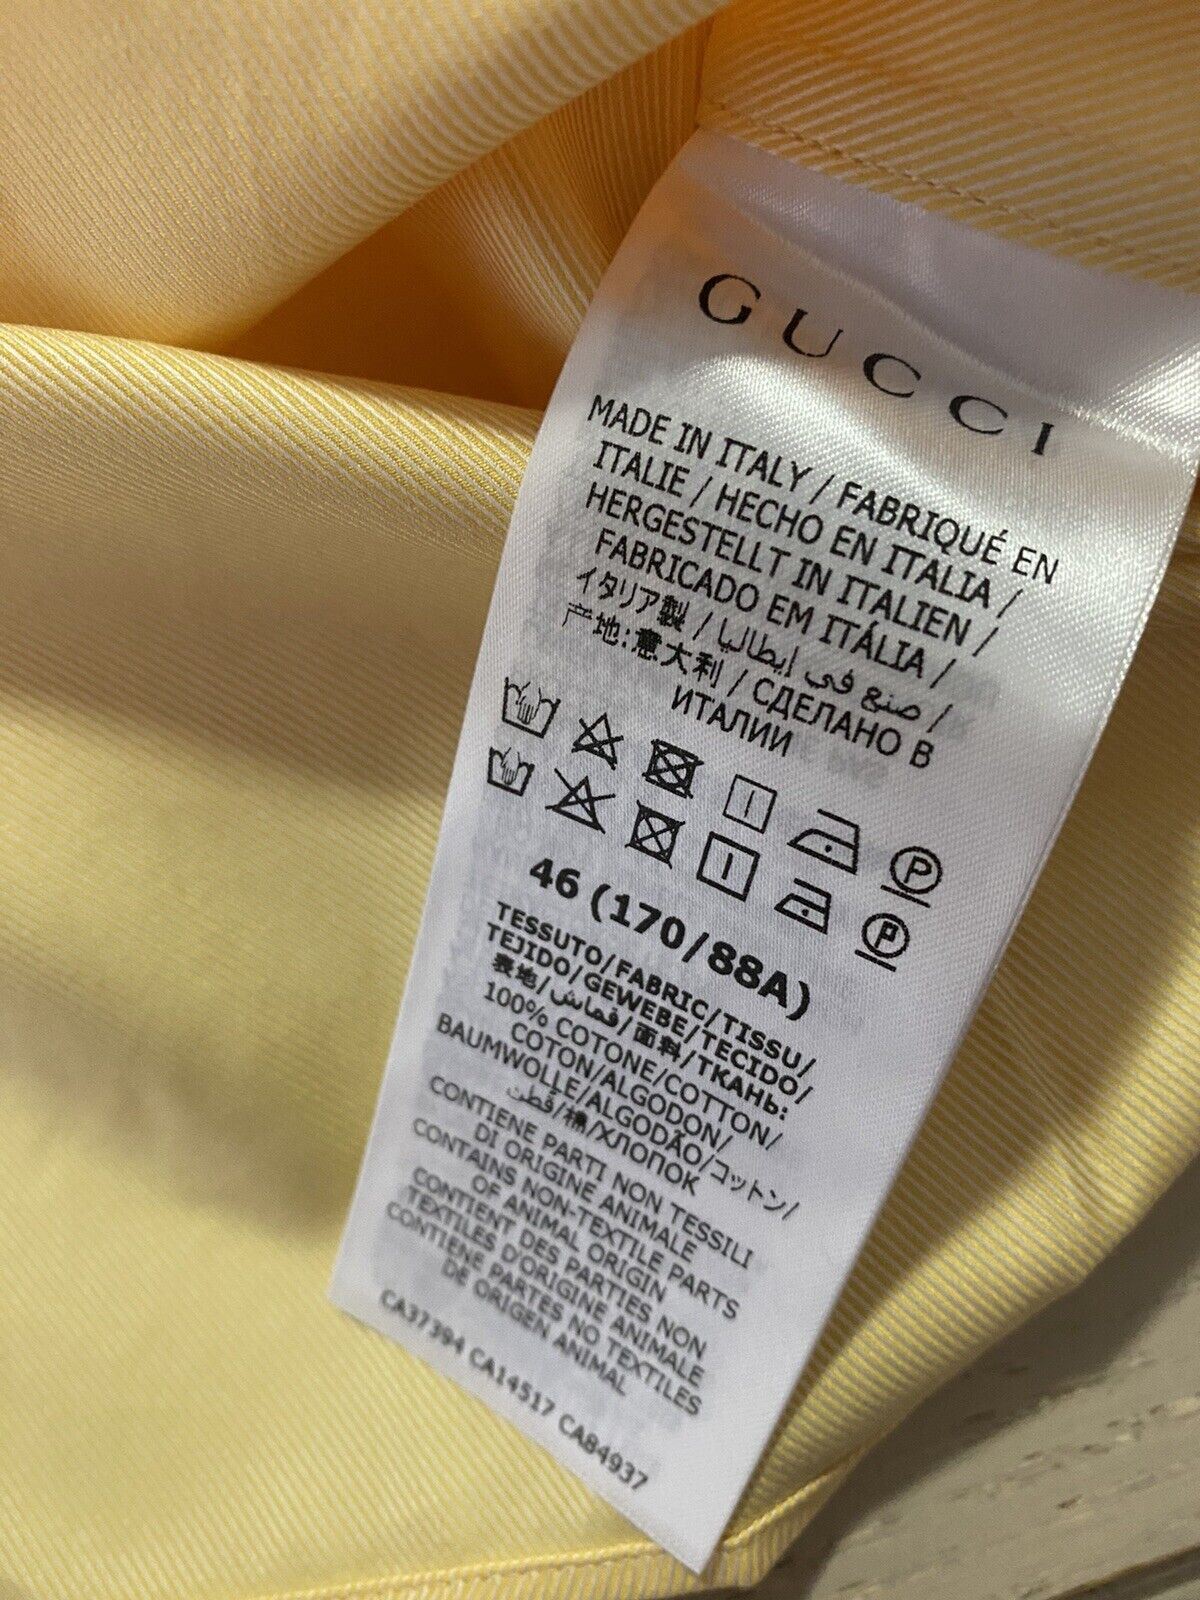 New Gucci Men’s Long Sleeve Dress Shirt Color Buttercup/Yellow Size M Italy